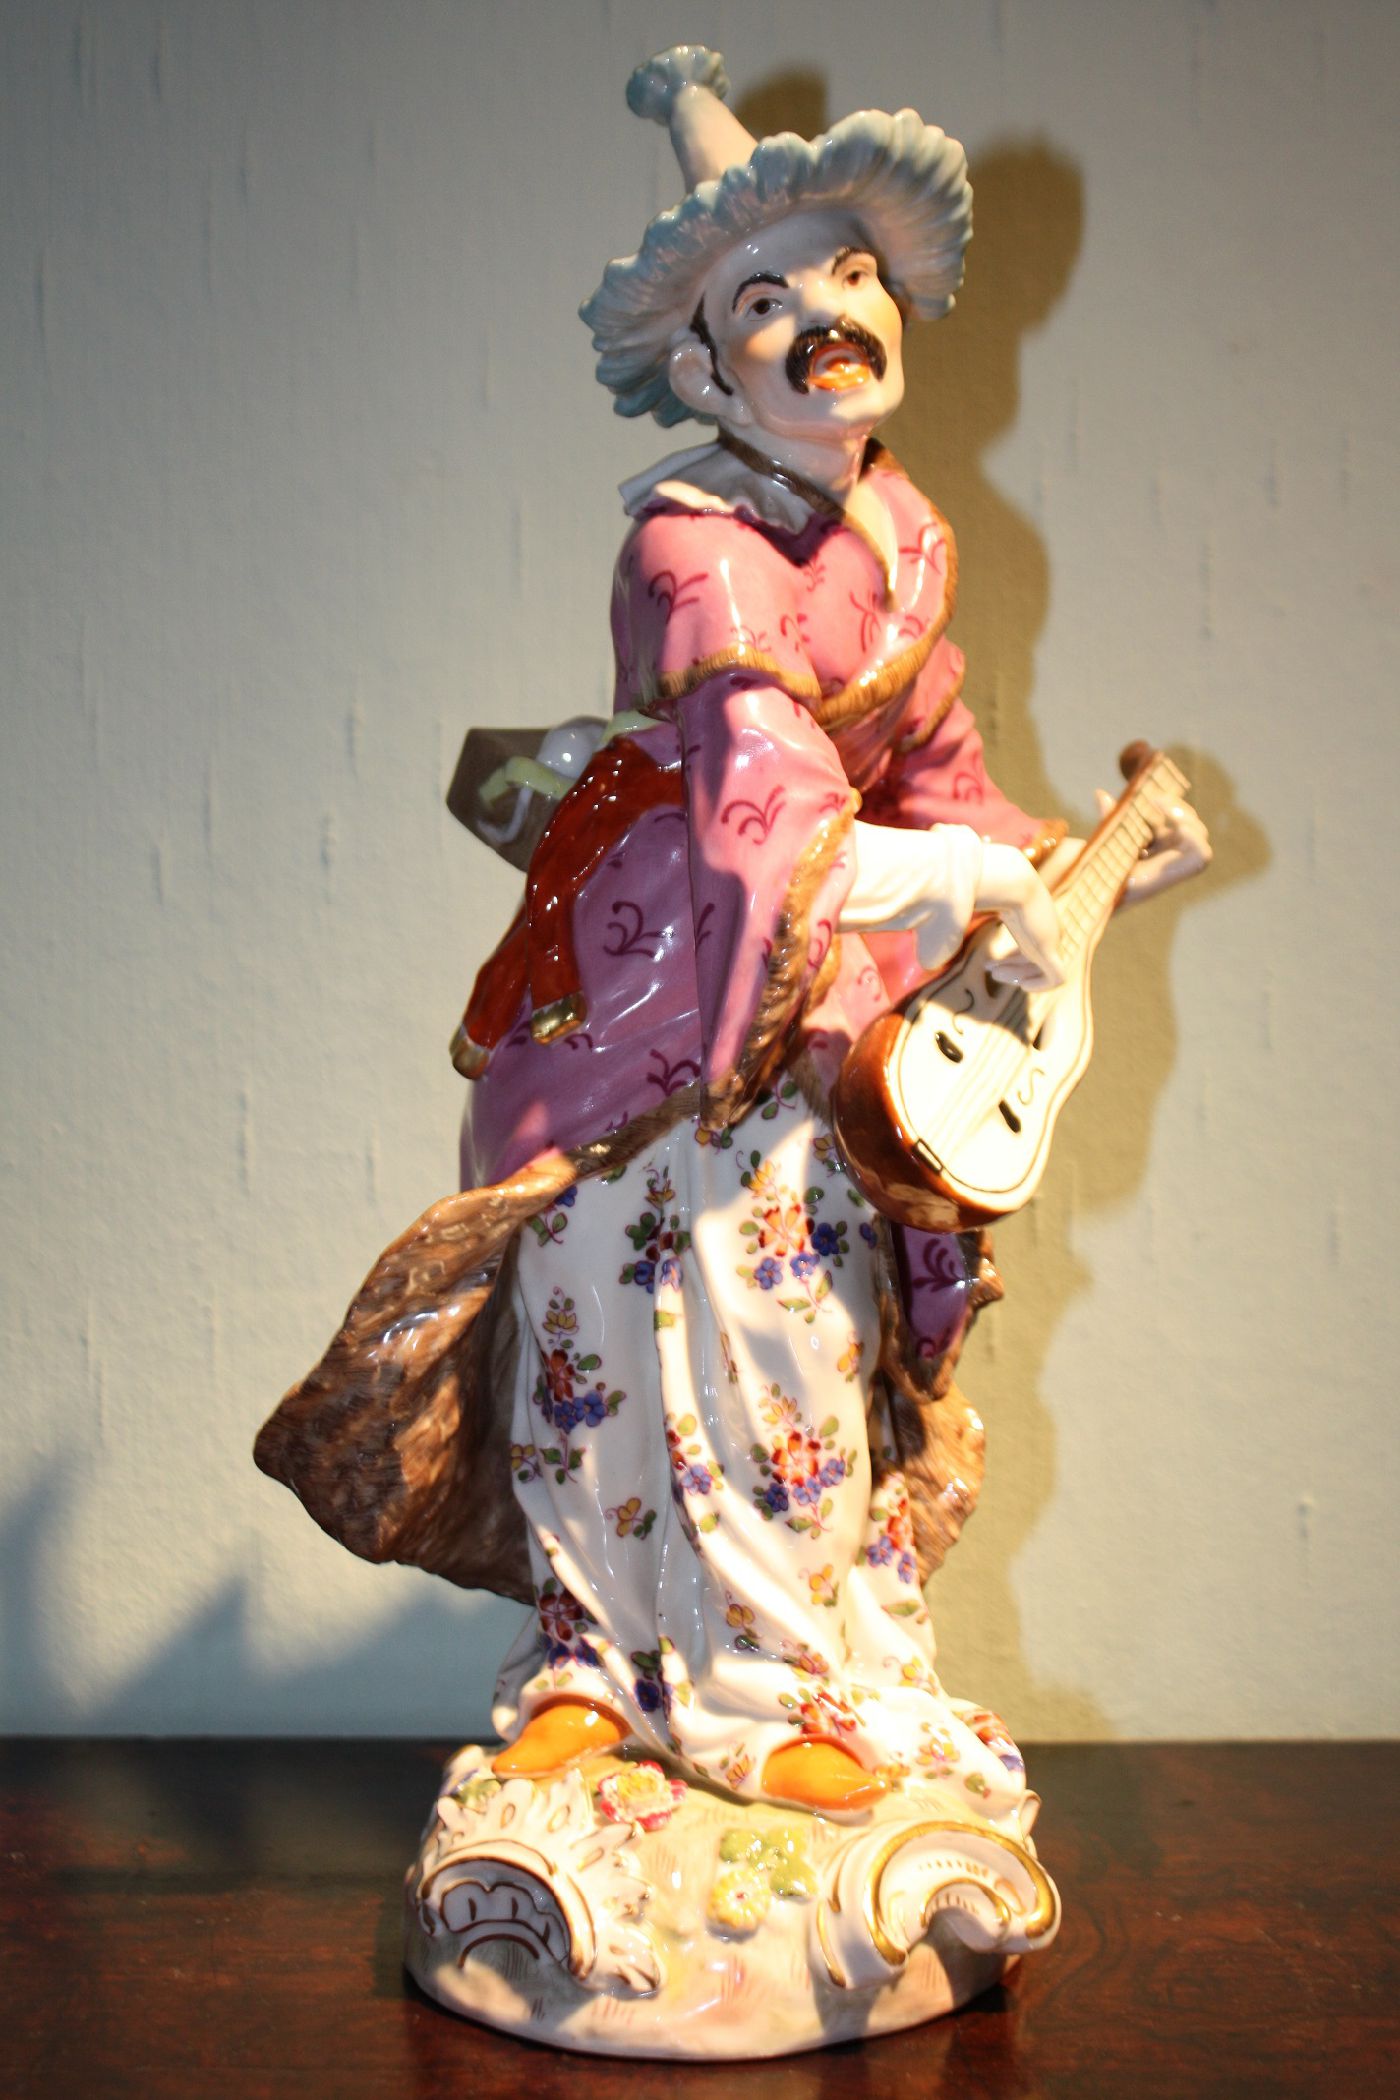 A big antique 19th century handpainted porcelain figure of a musician playing mandolin and singing, by Volkstedt Rudolstadt